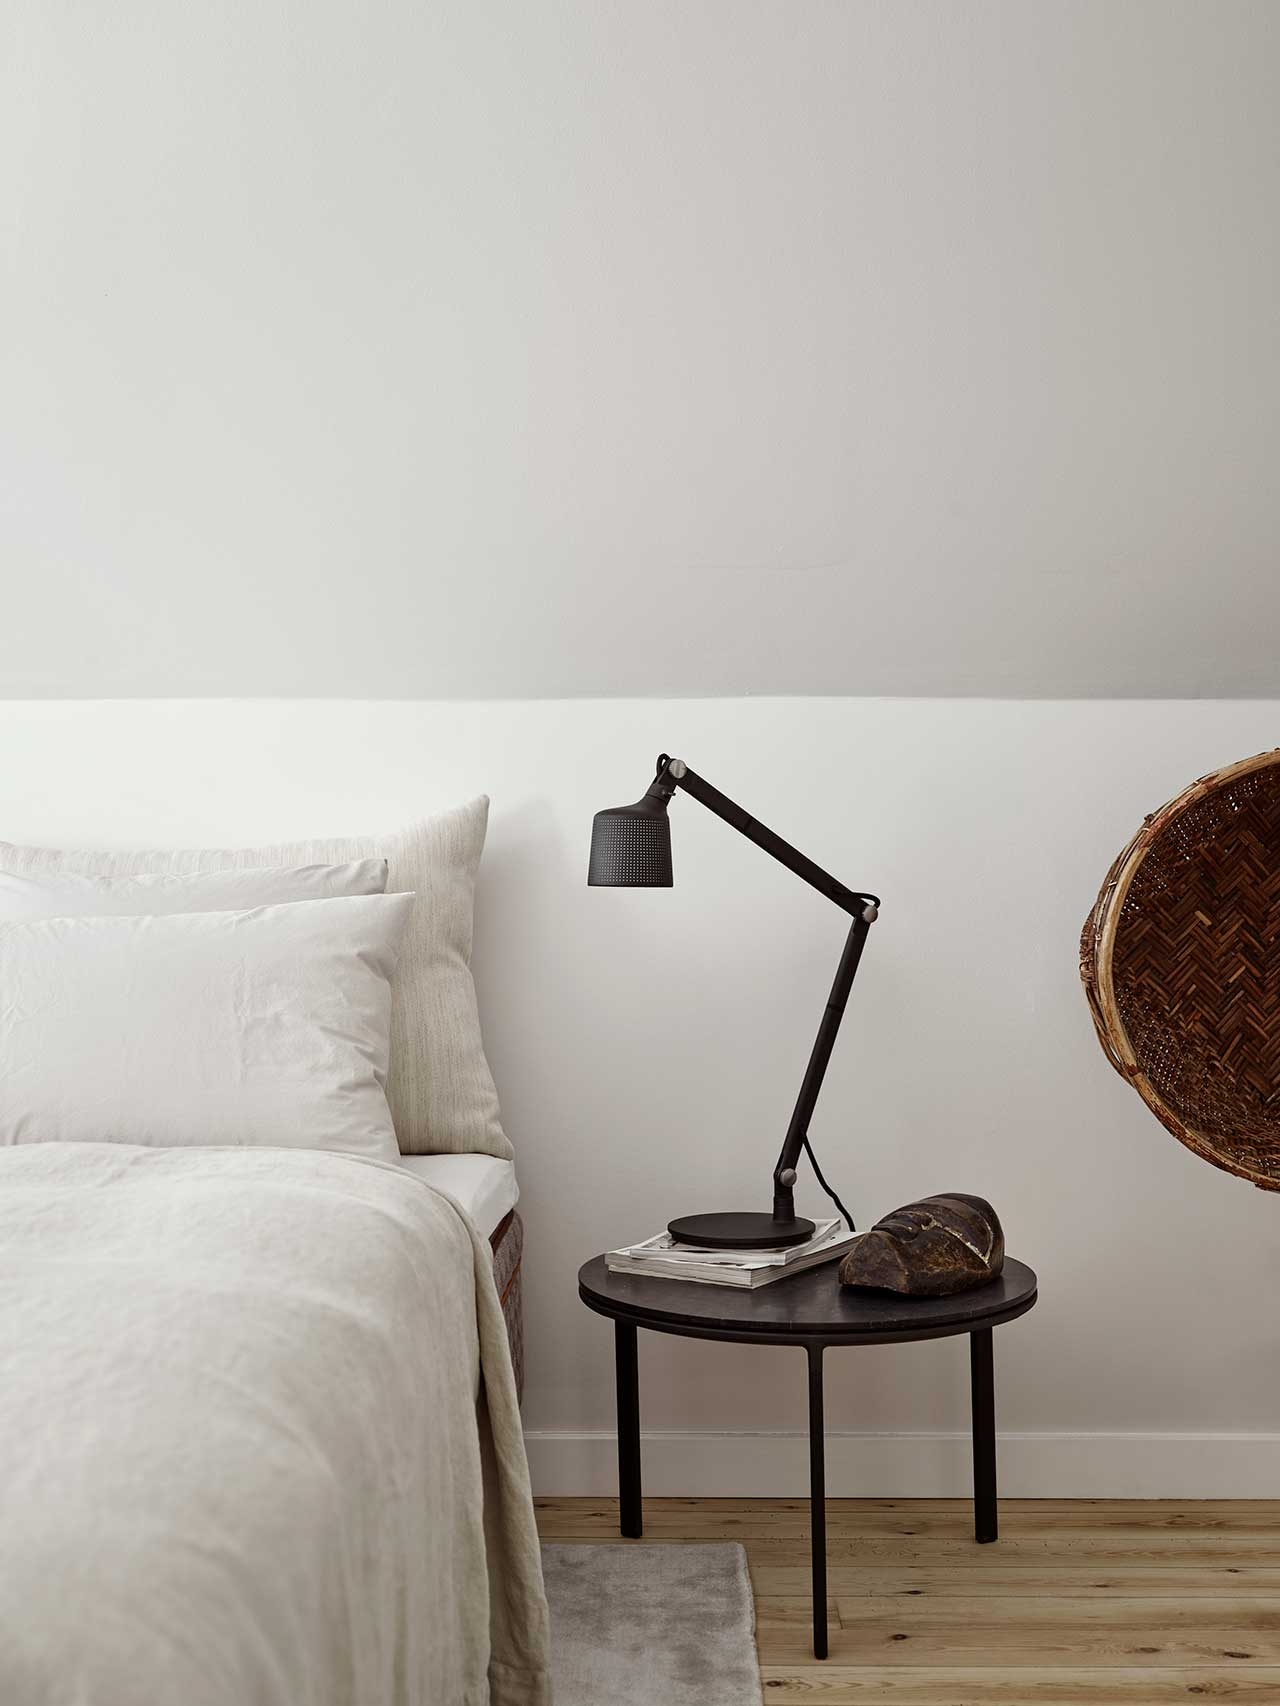 edge of bed with side table and lamp